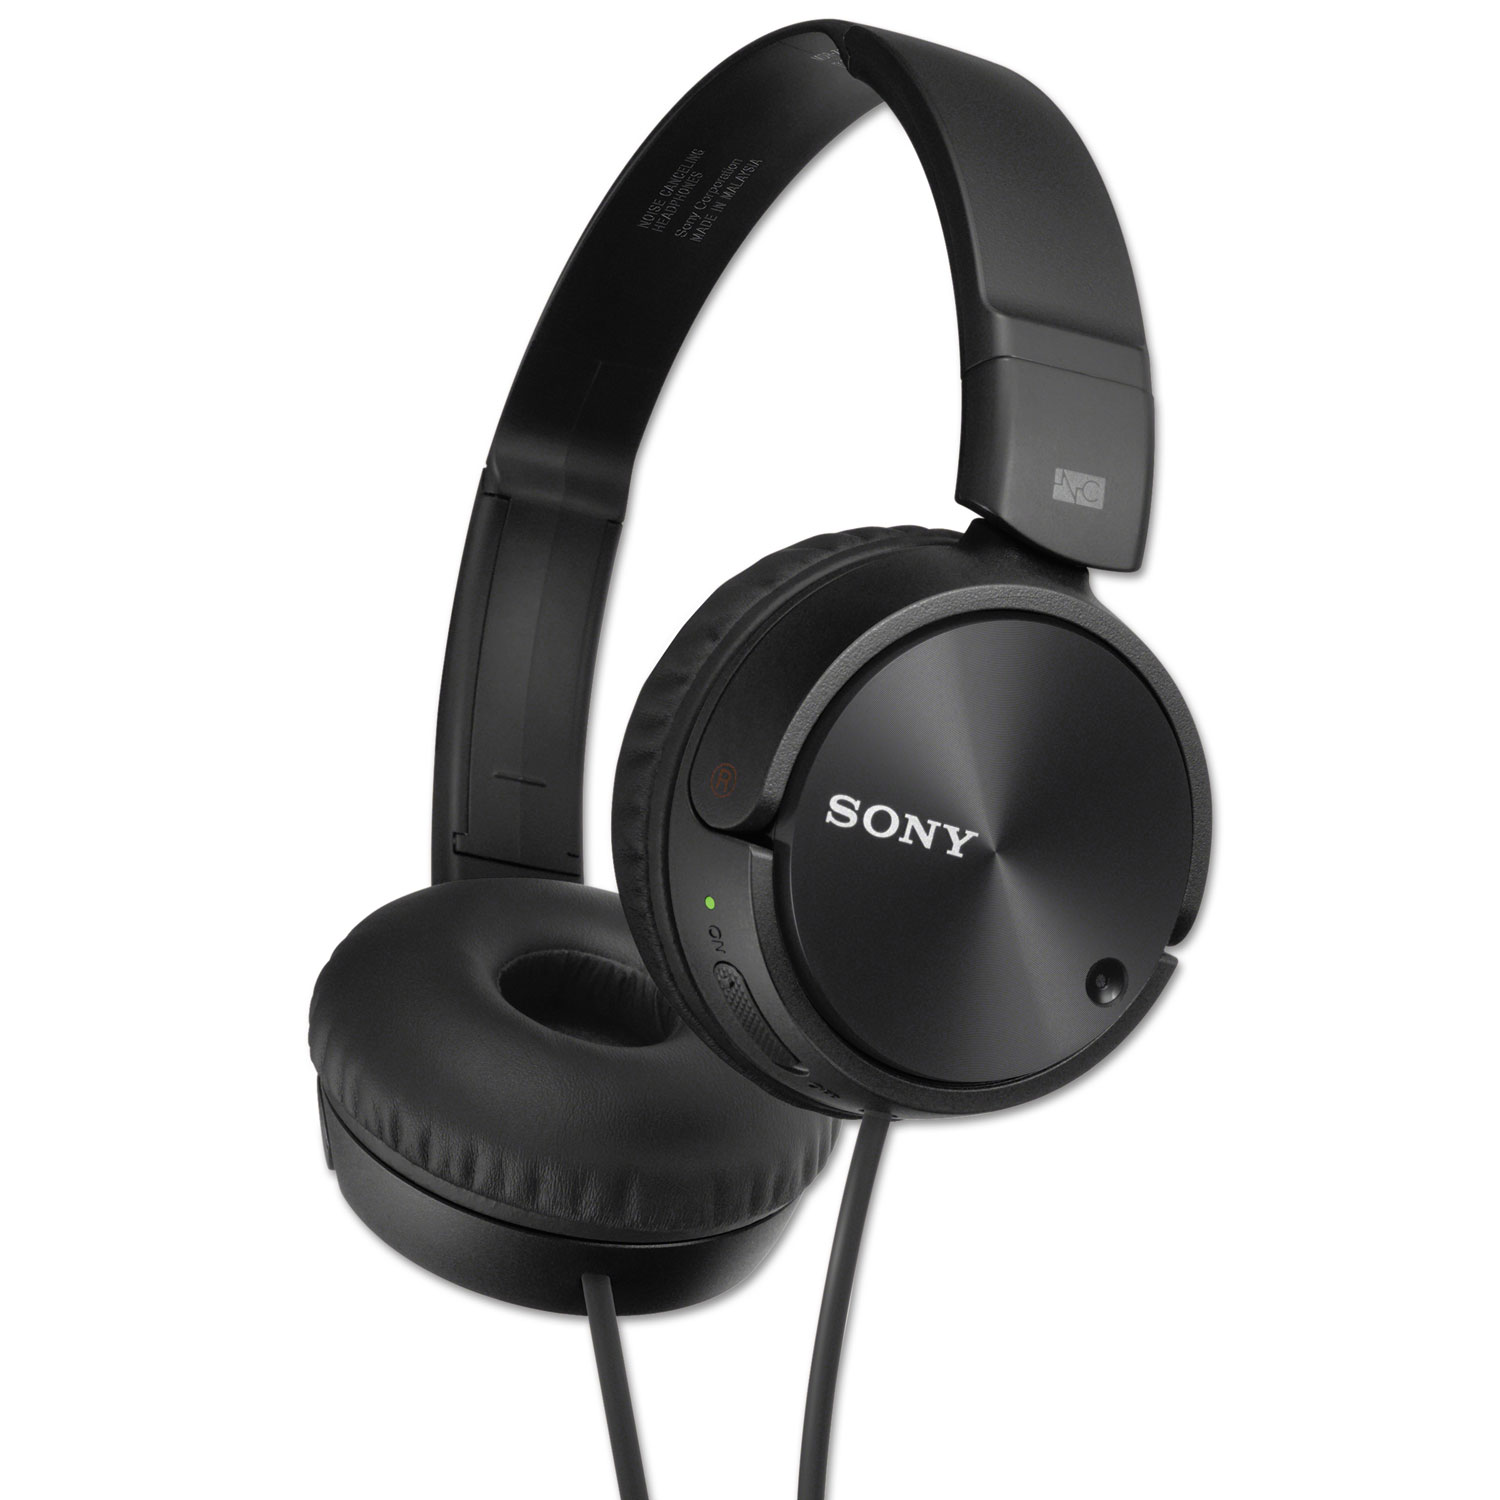  Sony MDRZX110NC Noise Canceling Headphones, Black (SONMDRZX110NC) 